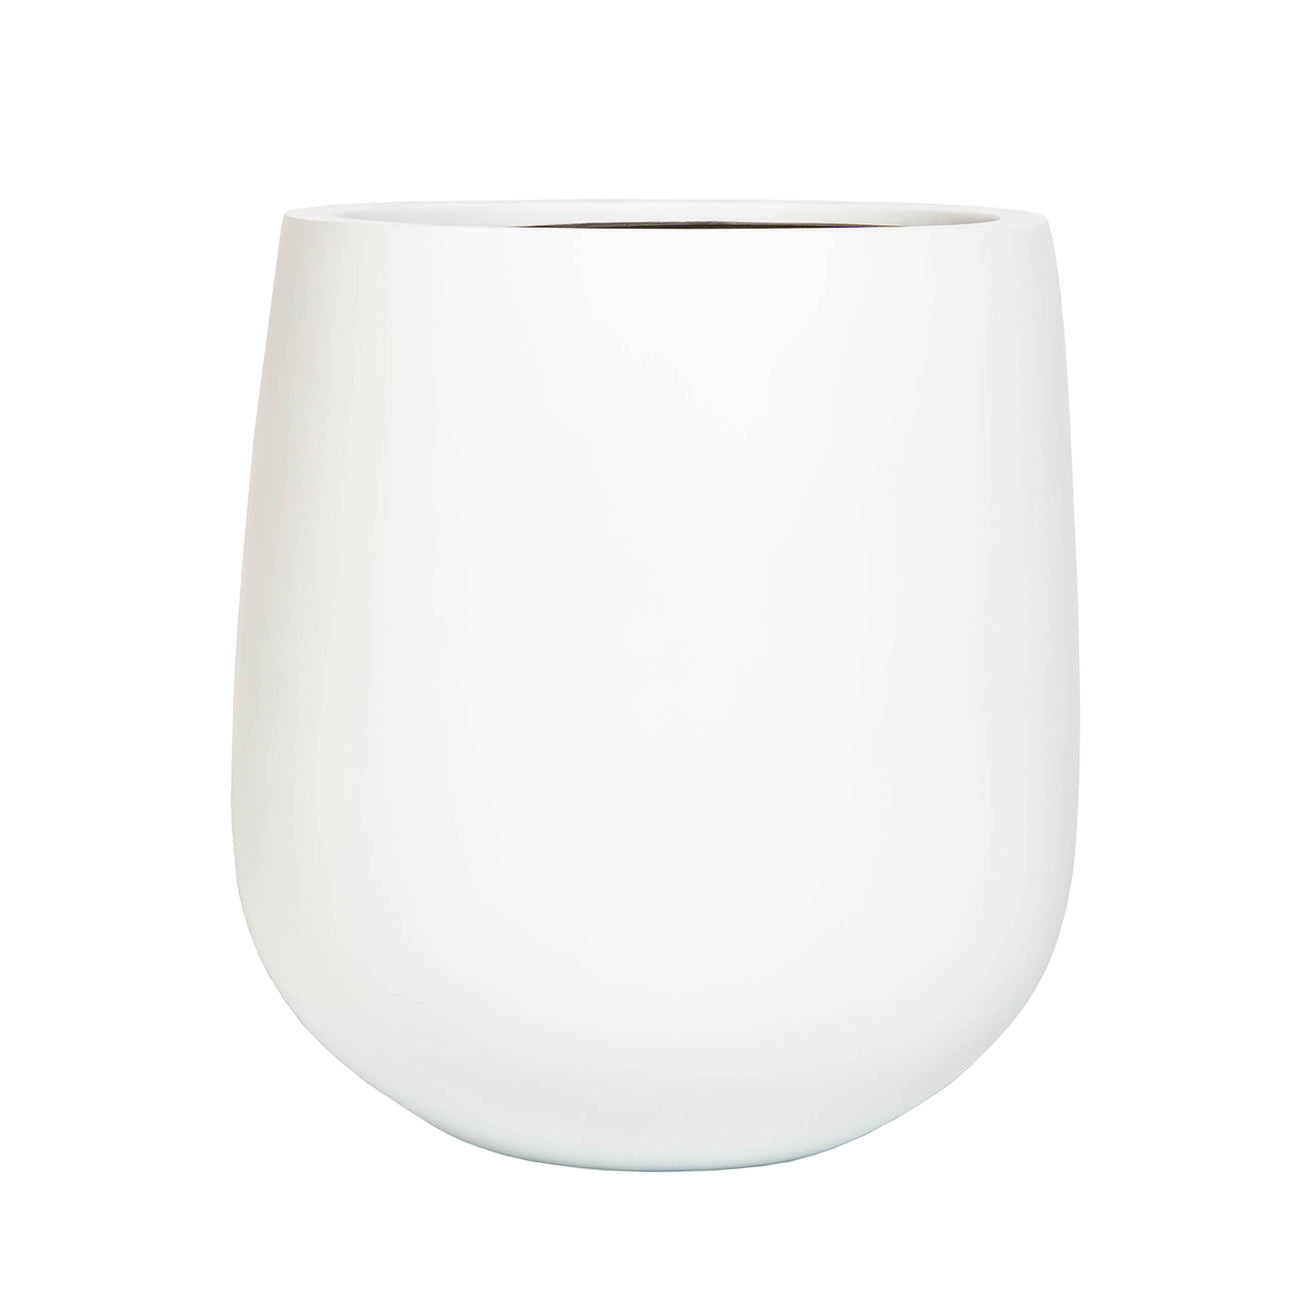 White fiberglass pots and planter large sizes for flower garden outdoor Graceland Home and Living